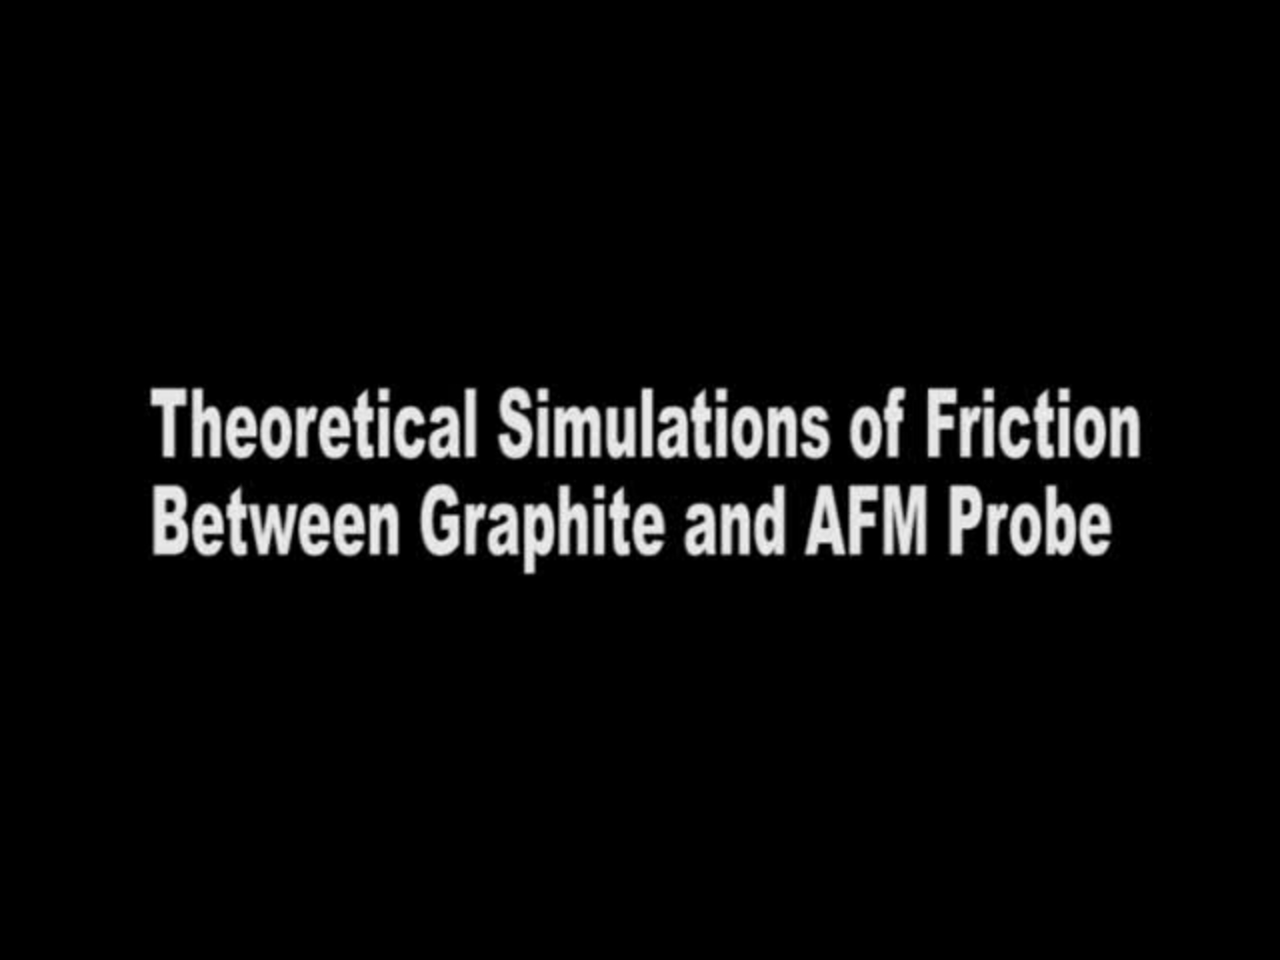 Theoretical Simulations of Friction Between Graphite and AFM Probe